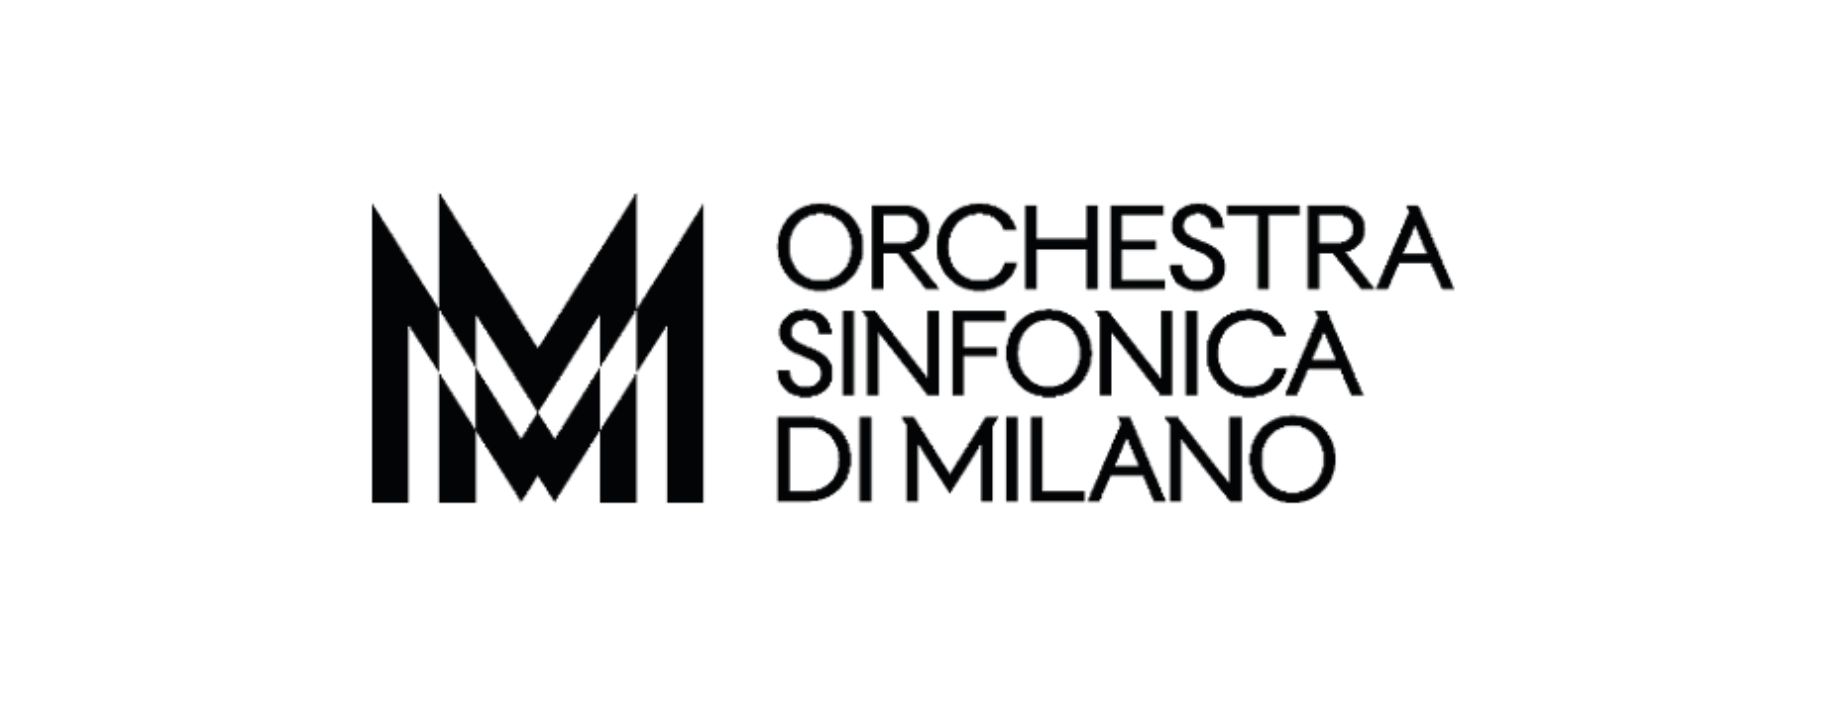 ORCHESTRA SINFONICA